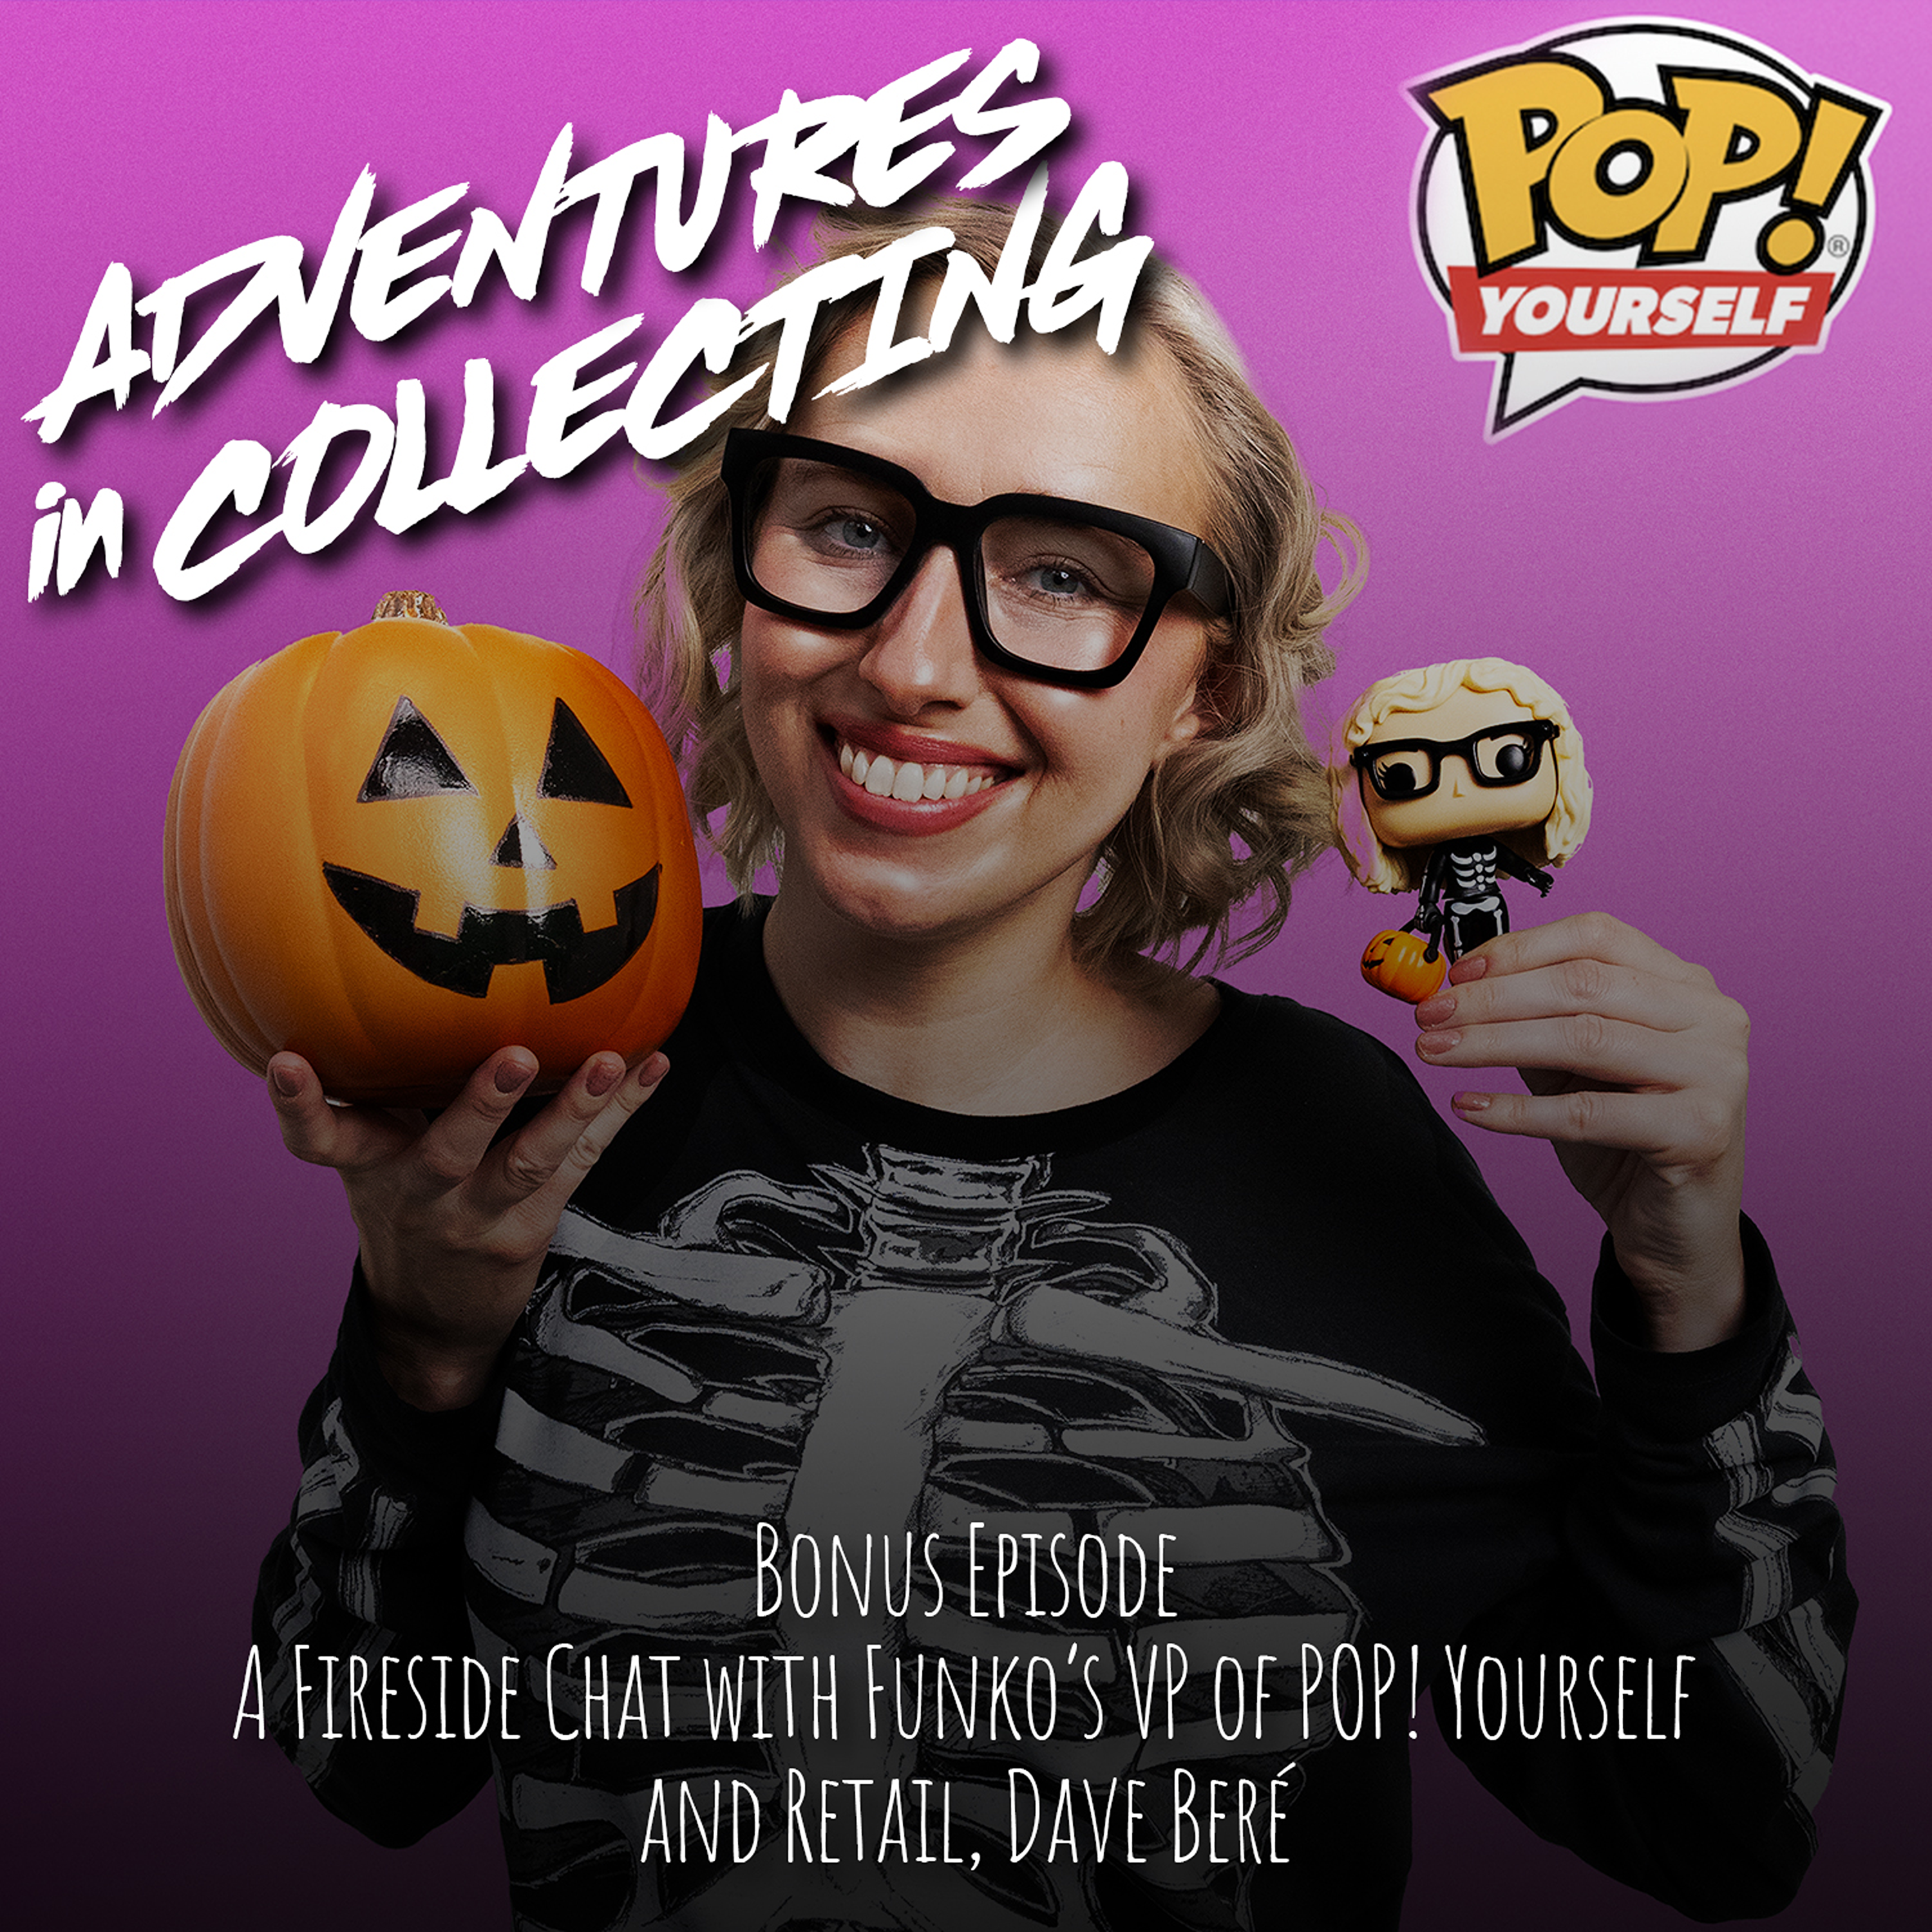 Bonus Episode: A Fireside Chat with Funko's VP of POP! Yourself and Retail, Dave Beré